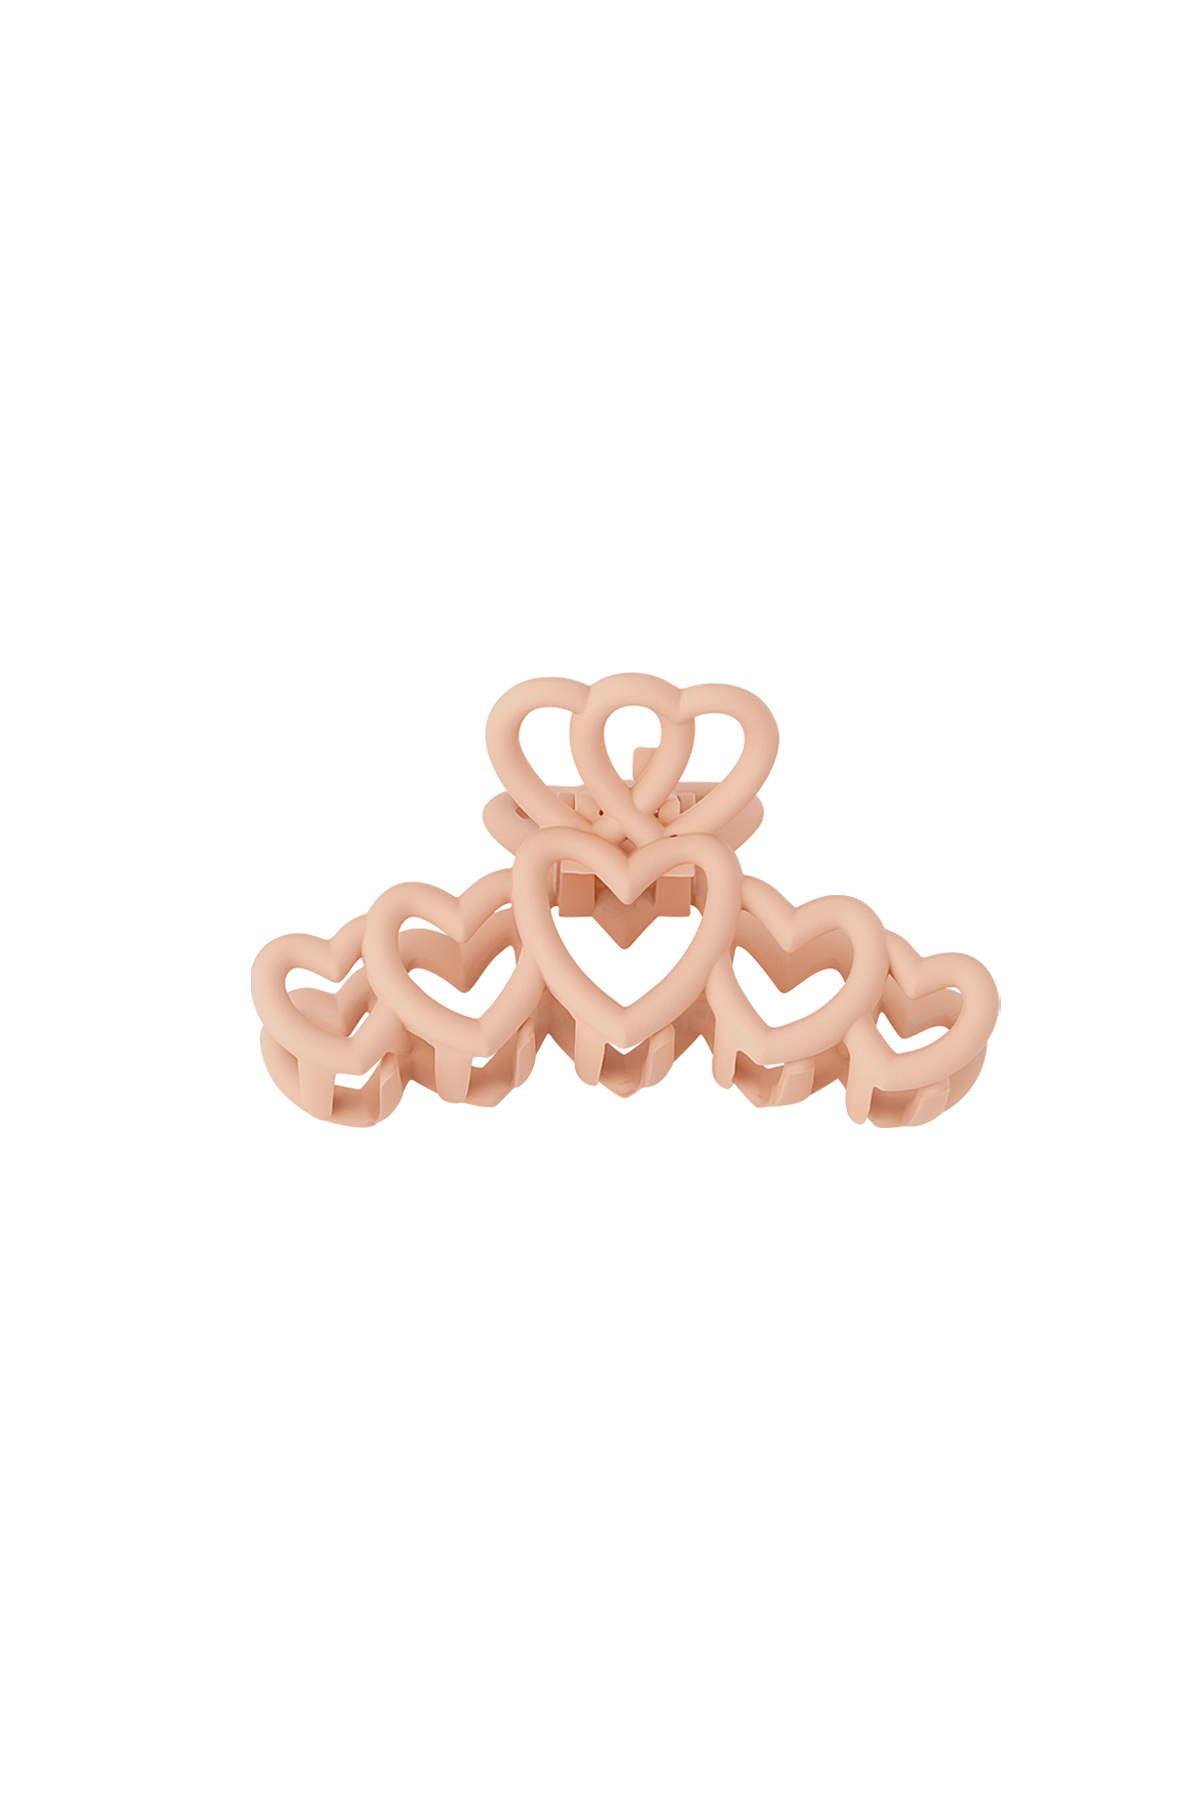 Hair clip hearts - pink Plastic h5 